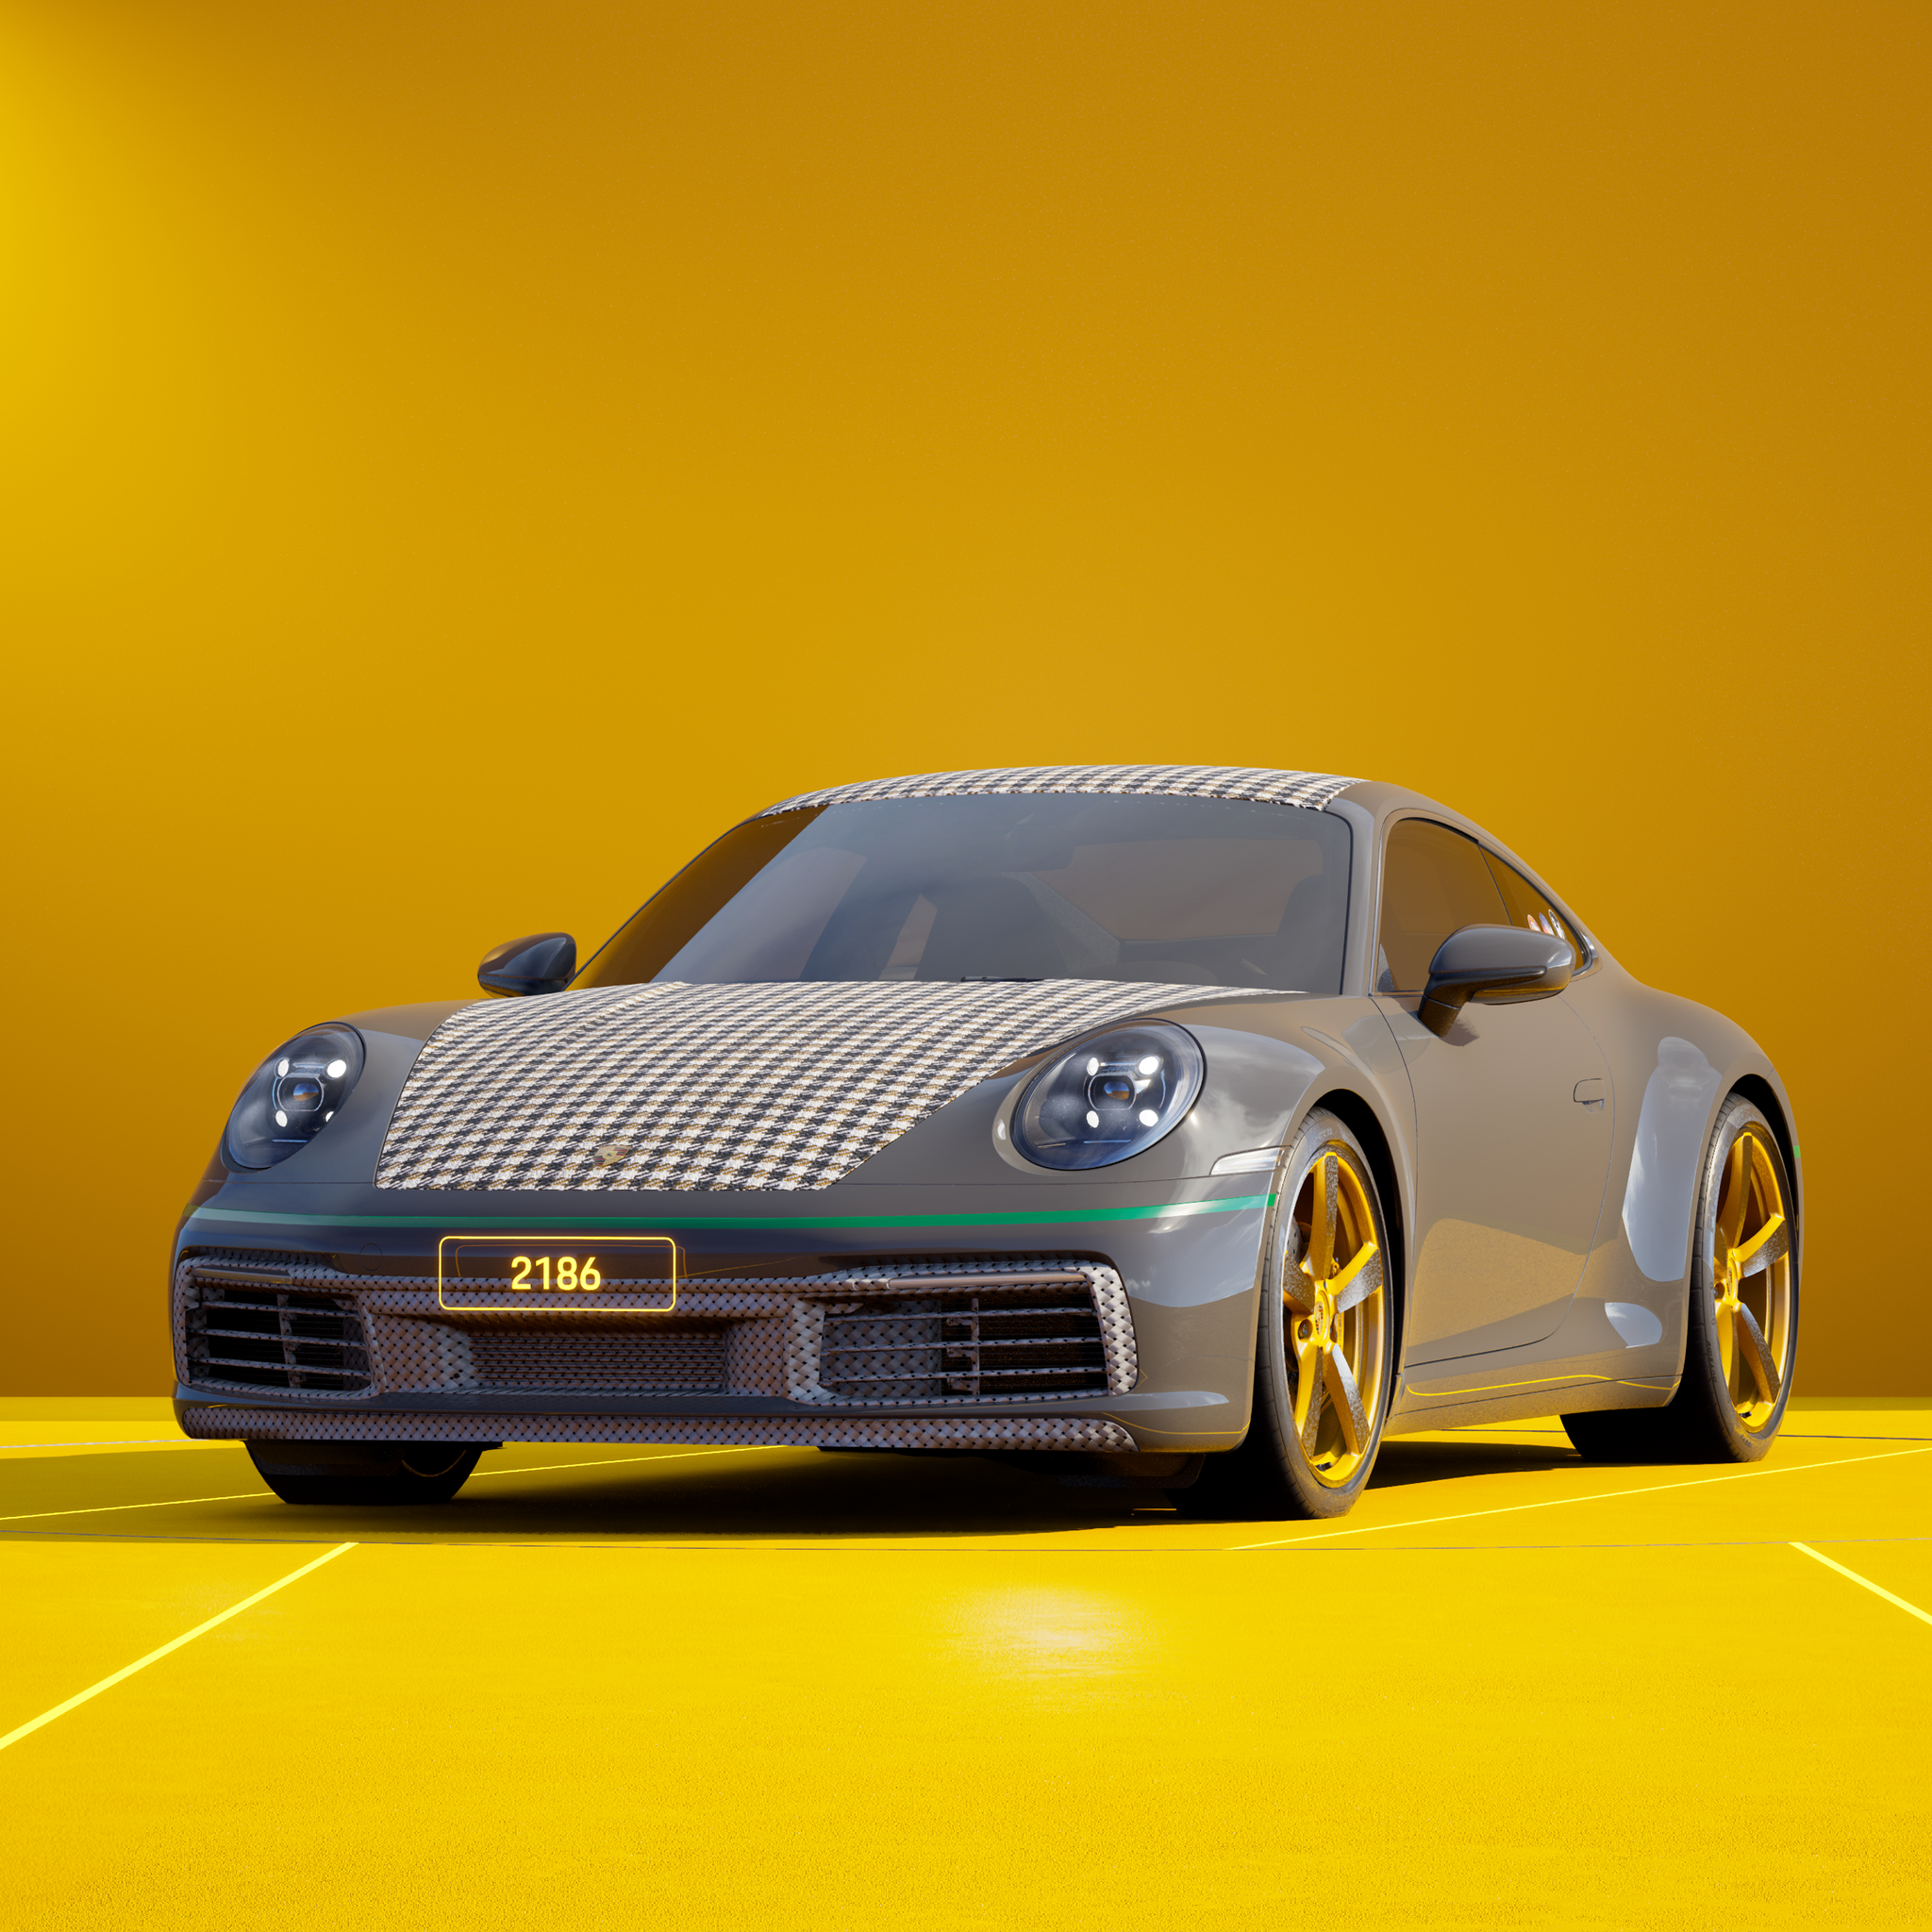 The PORSCHΞ 911 2186 image in phase